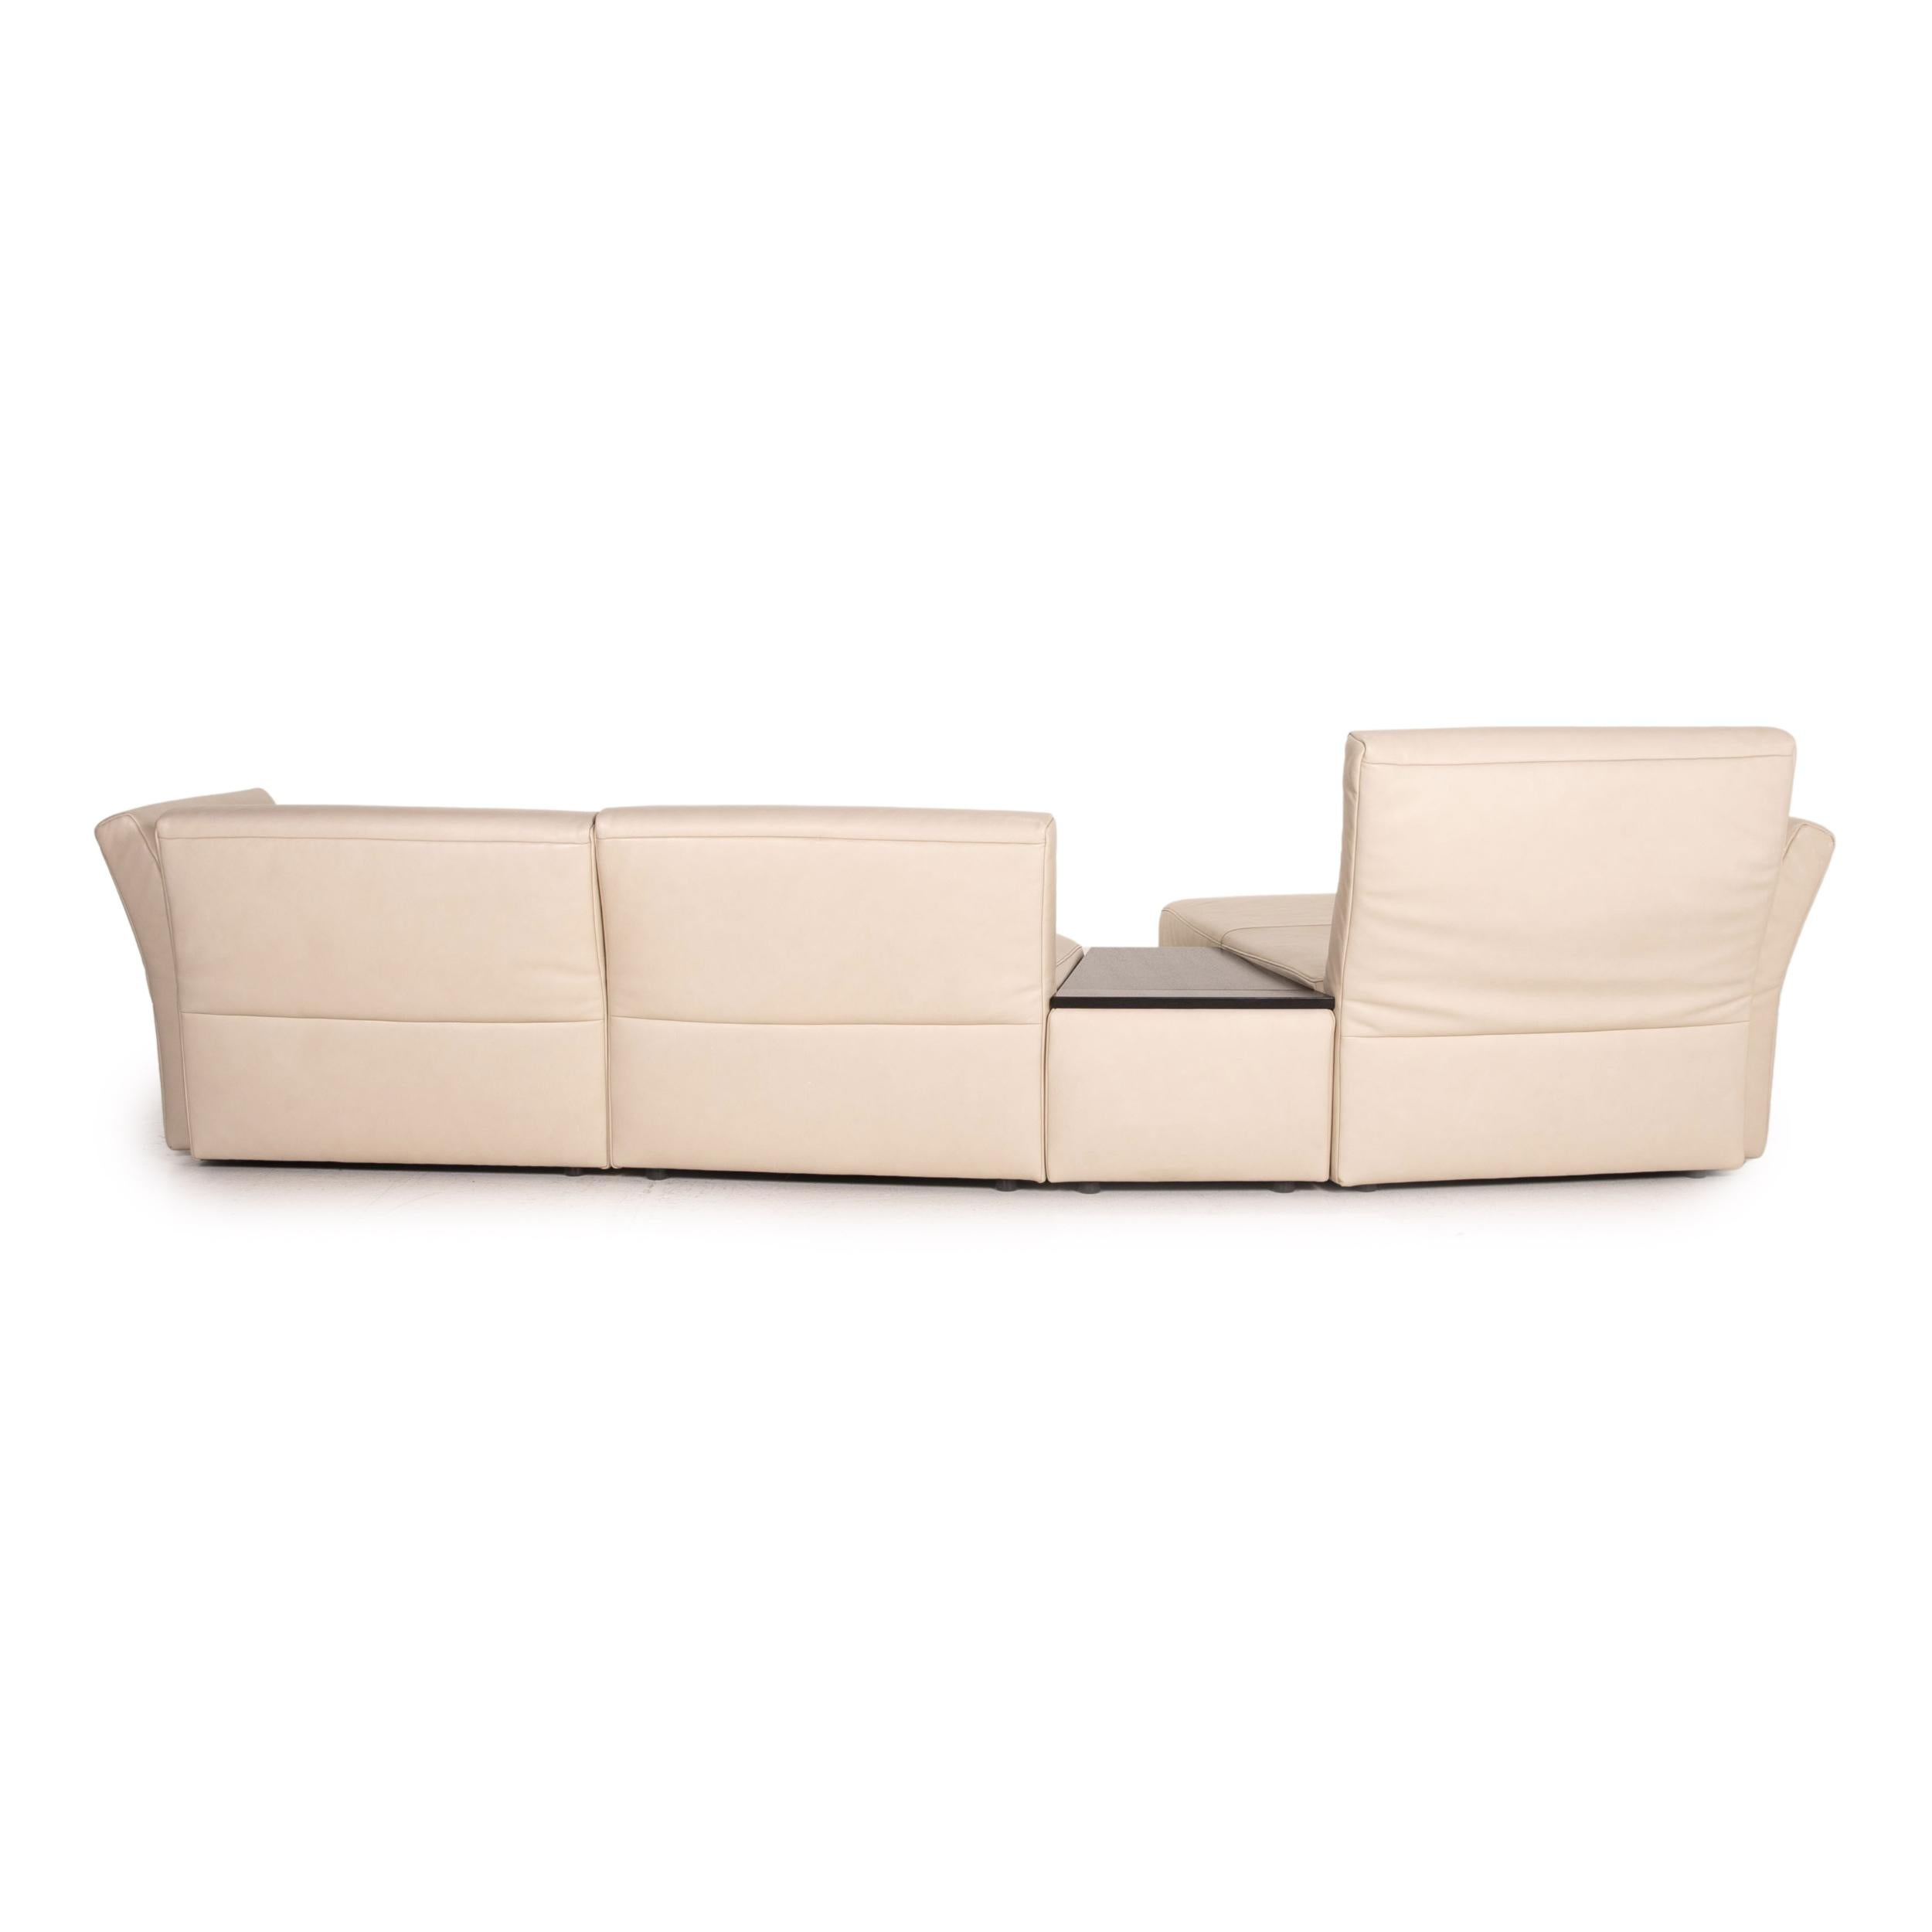 Koinor Avanti Leather Corner Sofa Beige Sofa Couch Function For Sale 2